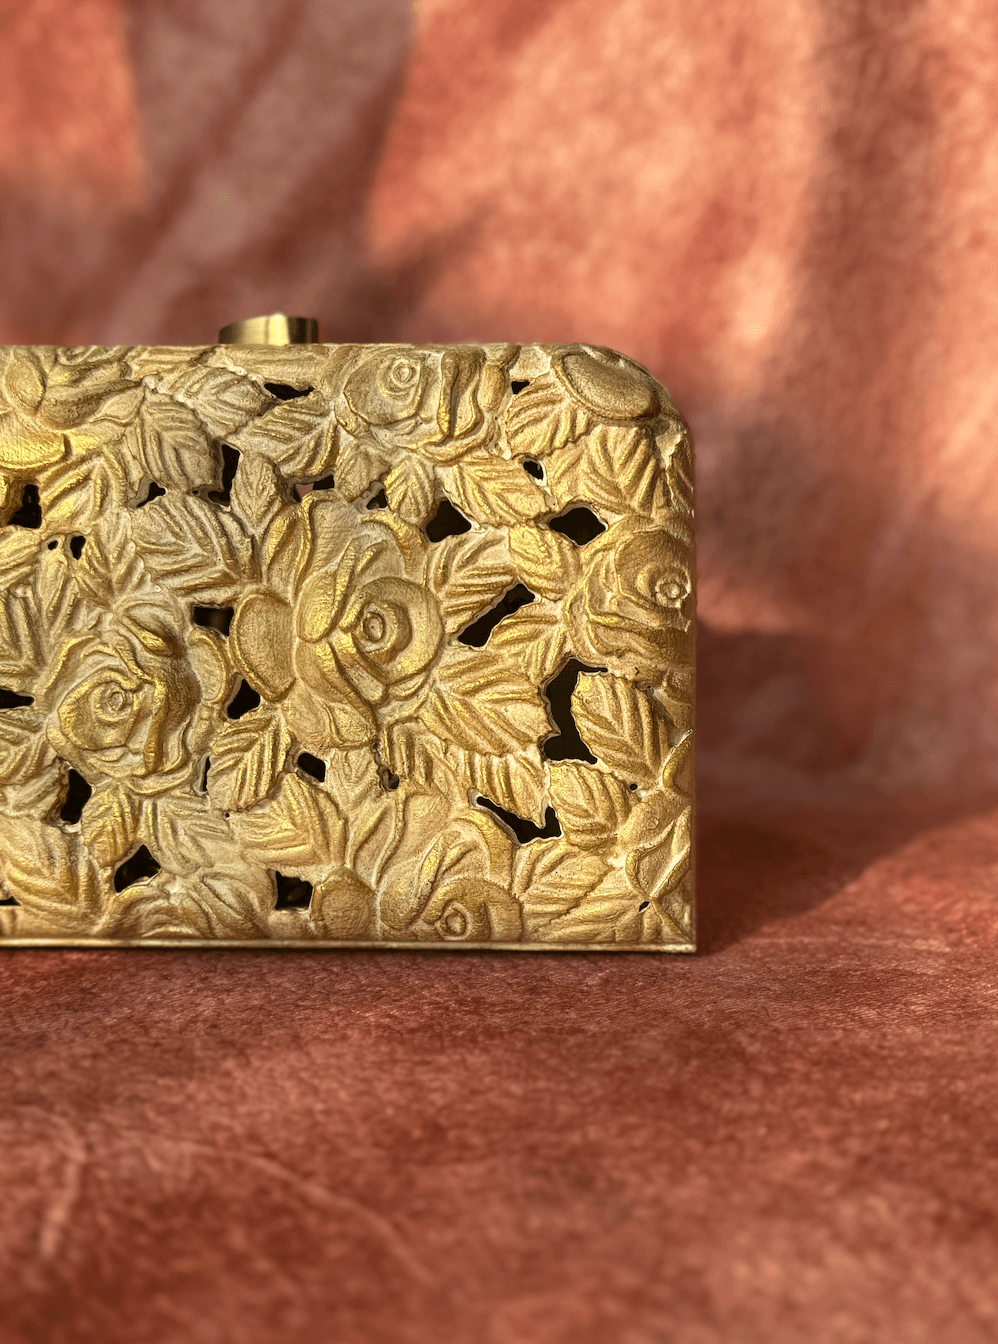 Carved wood clutch with delicate roses and leaves in vintage gold finish